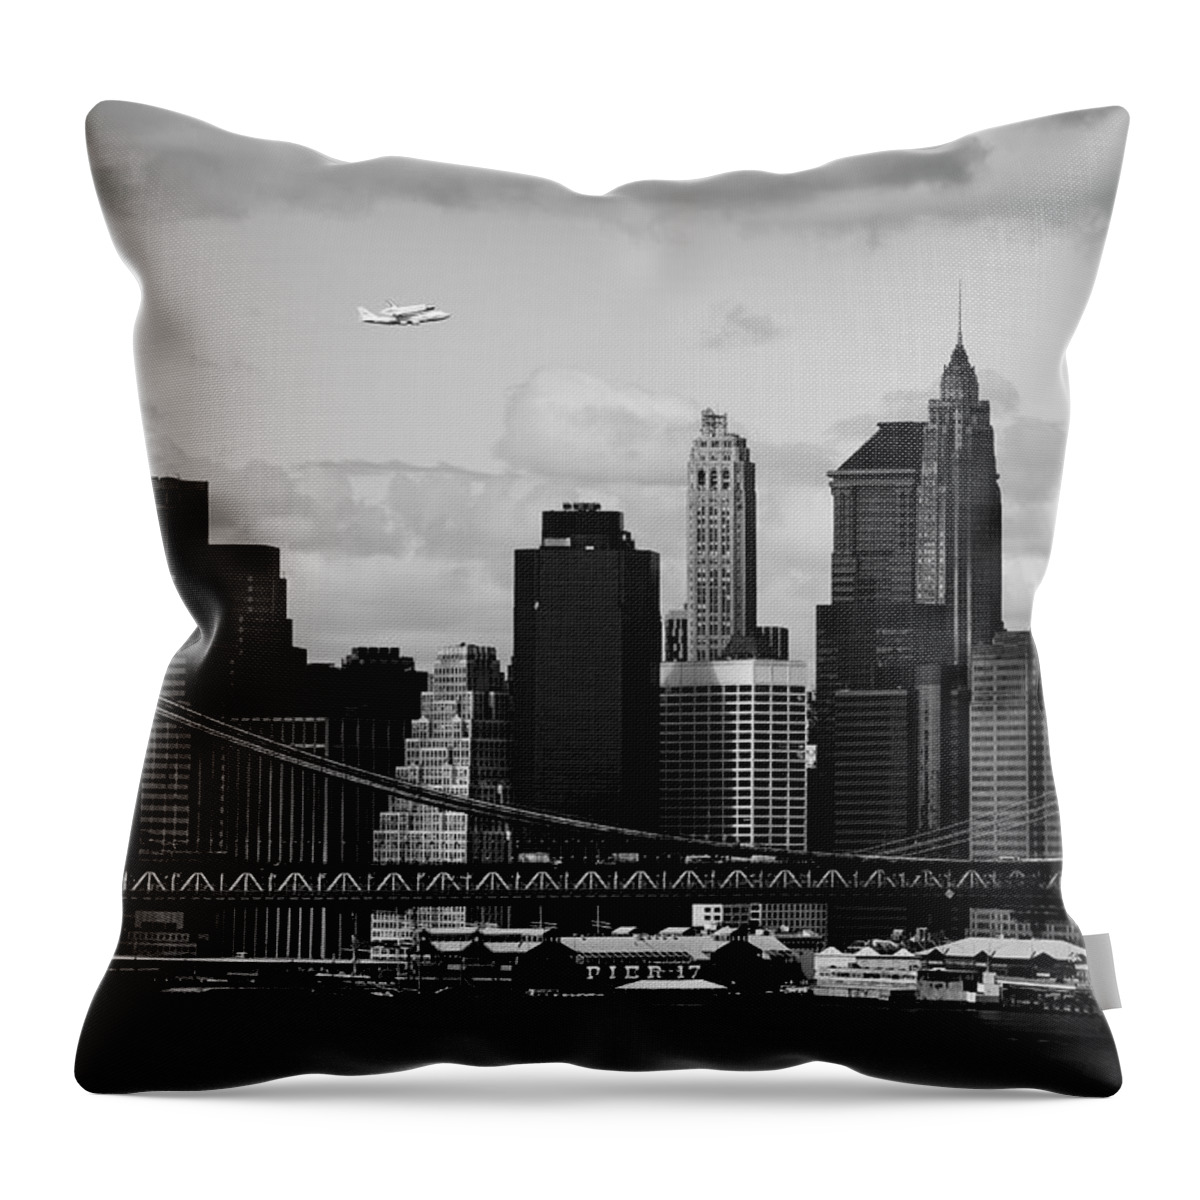 Space Mission Throw Pillow featuring the photograph Enterprise Over Nyc by Kirk Edwards